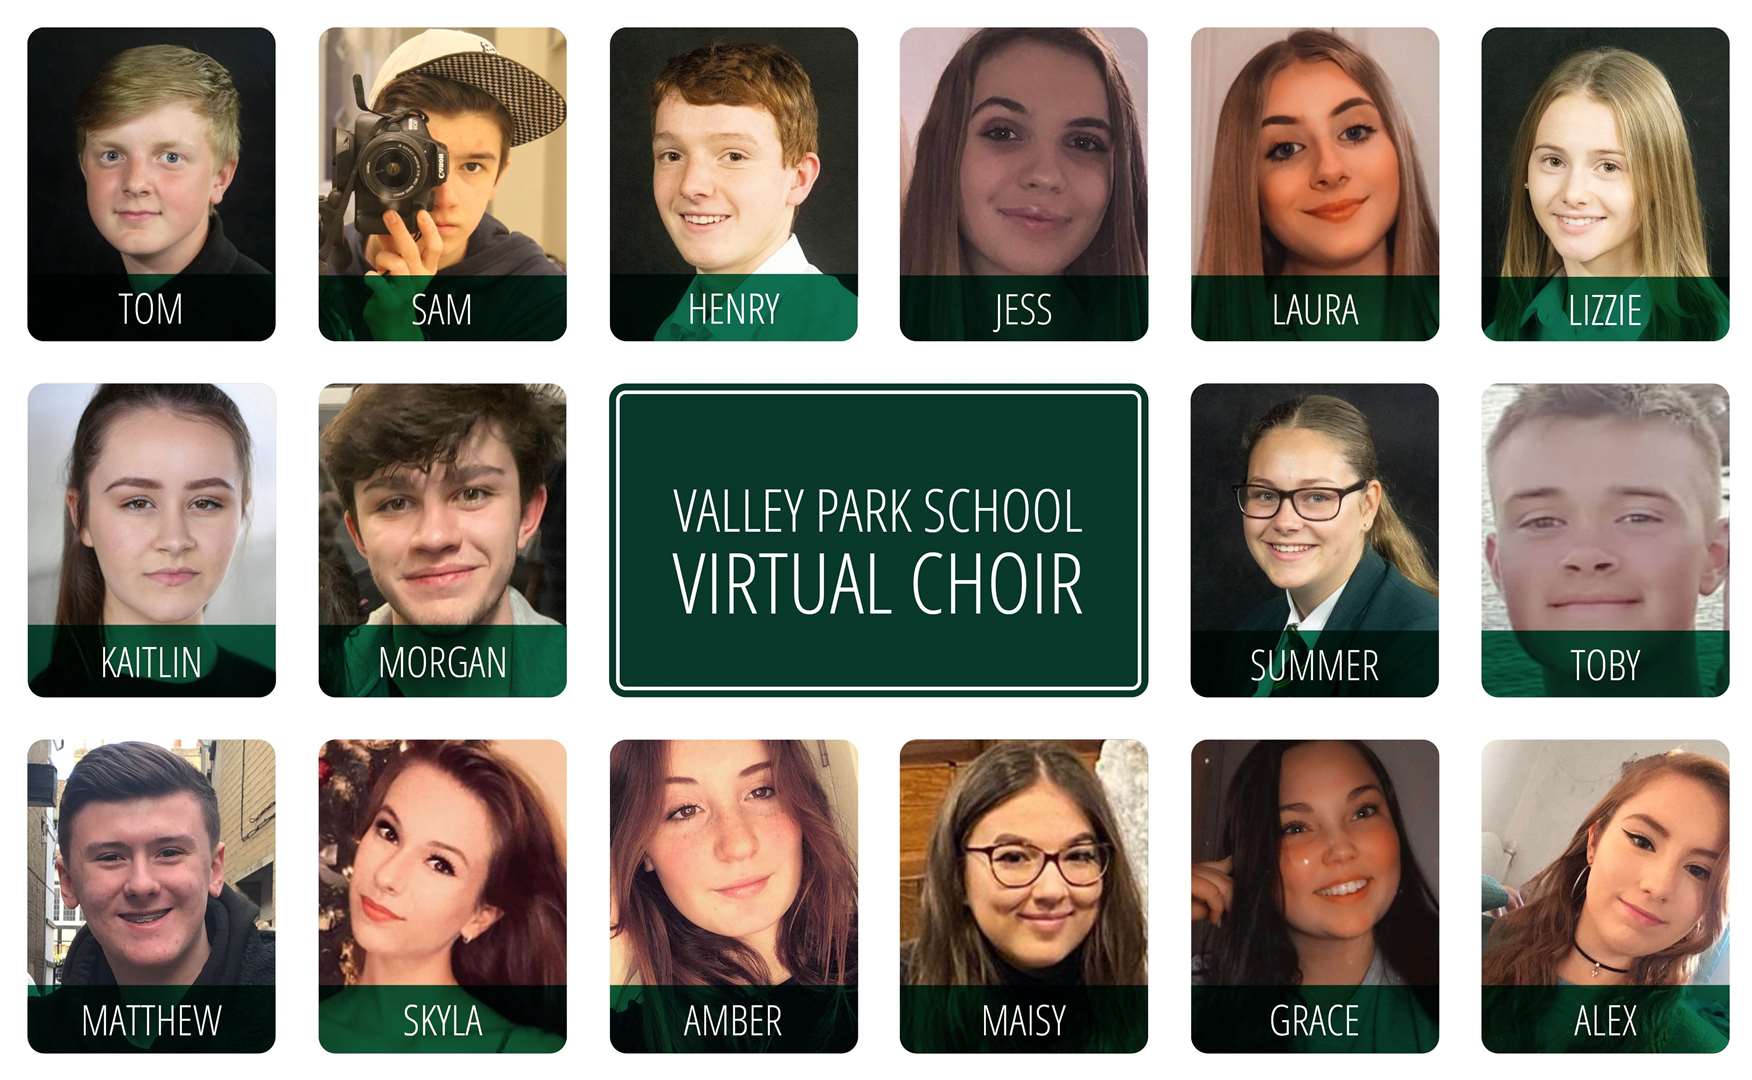 Members of the Valley Park School virtual choir who have recorded a song in tribute to NHS workers